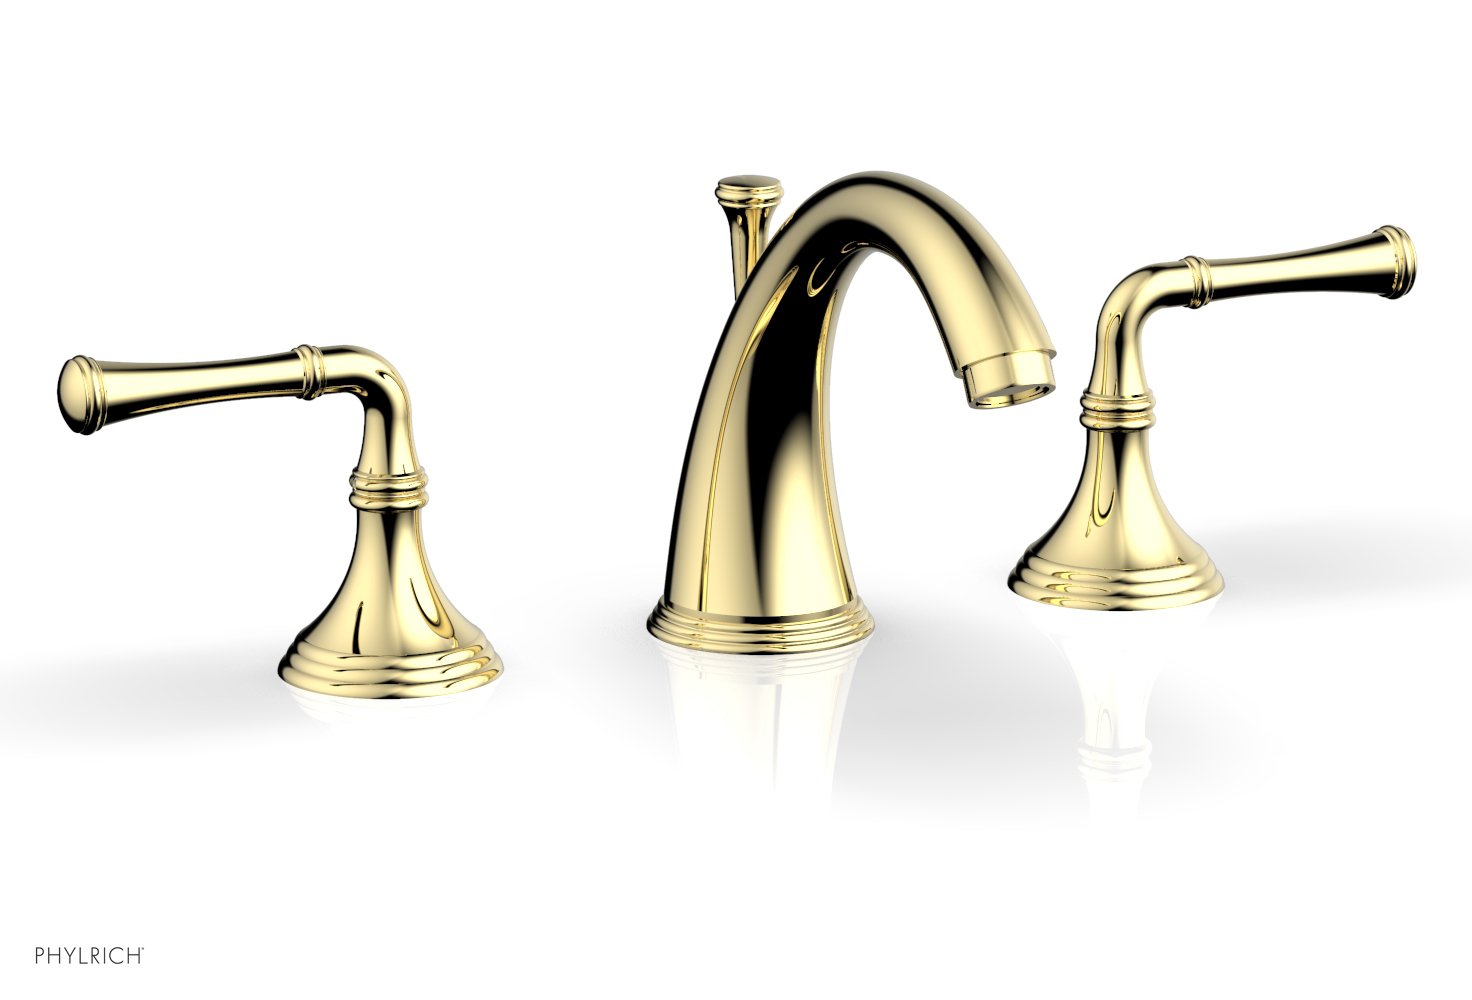 Phylrich 3RING Widespread Faucet